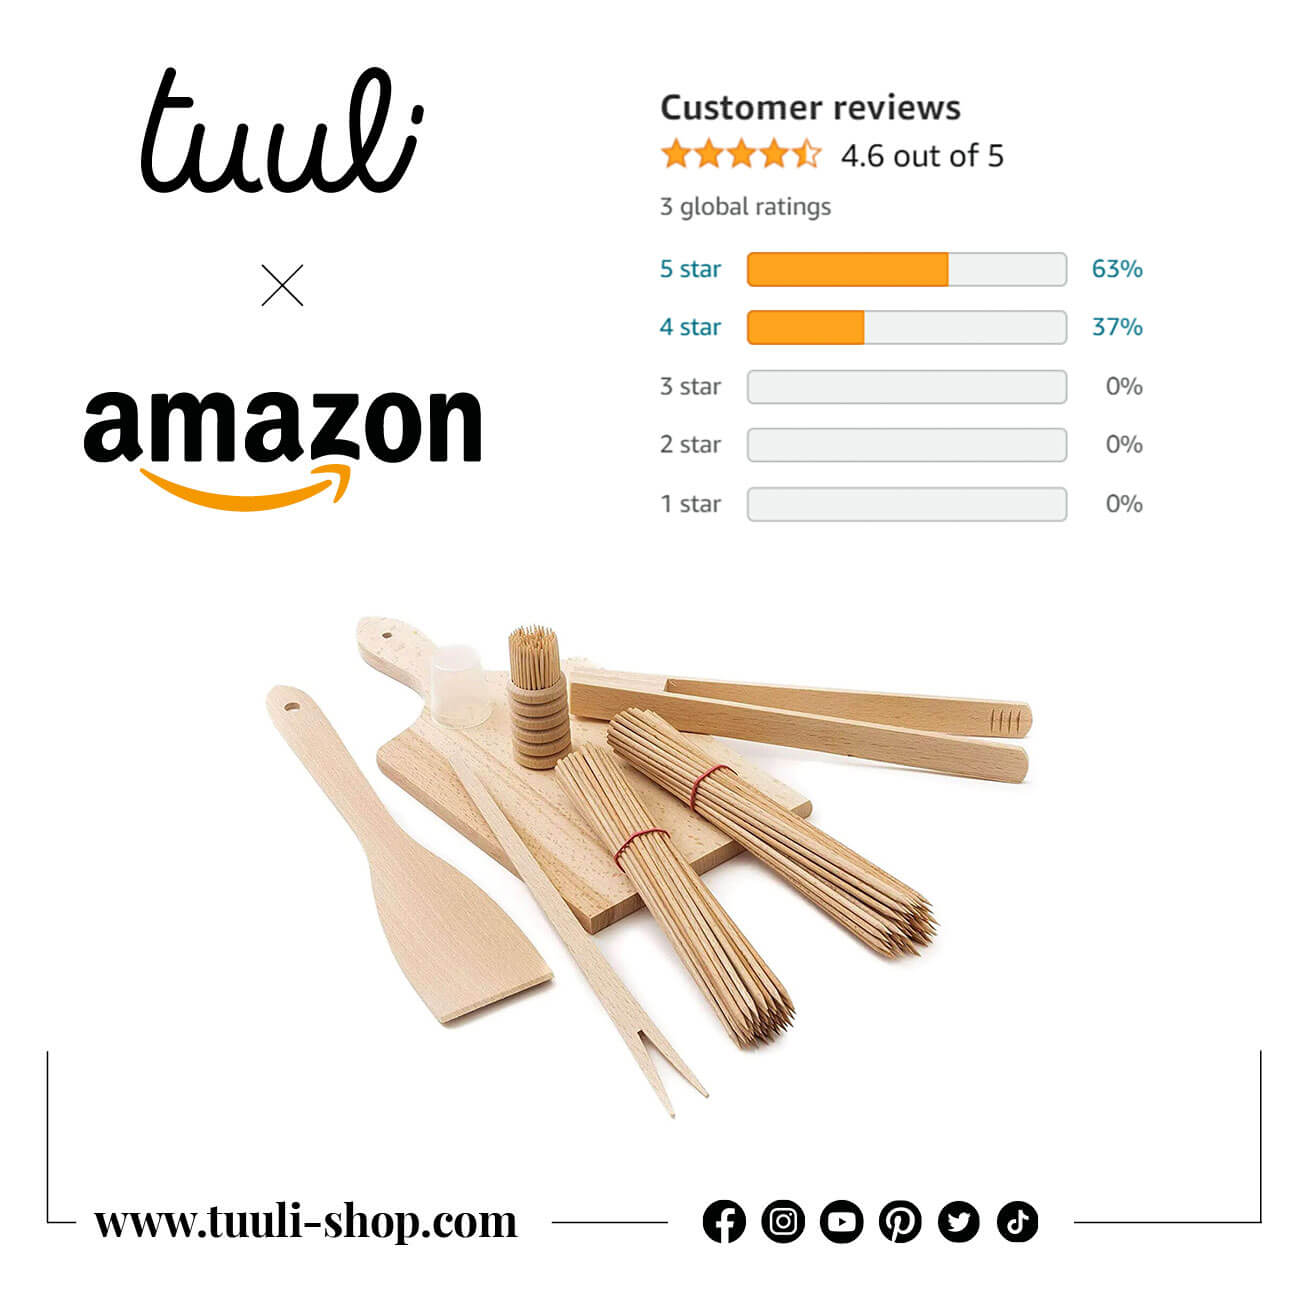 Grilling Perfection with Premium Wooden BBQ Utensils